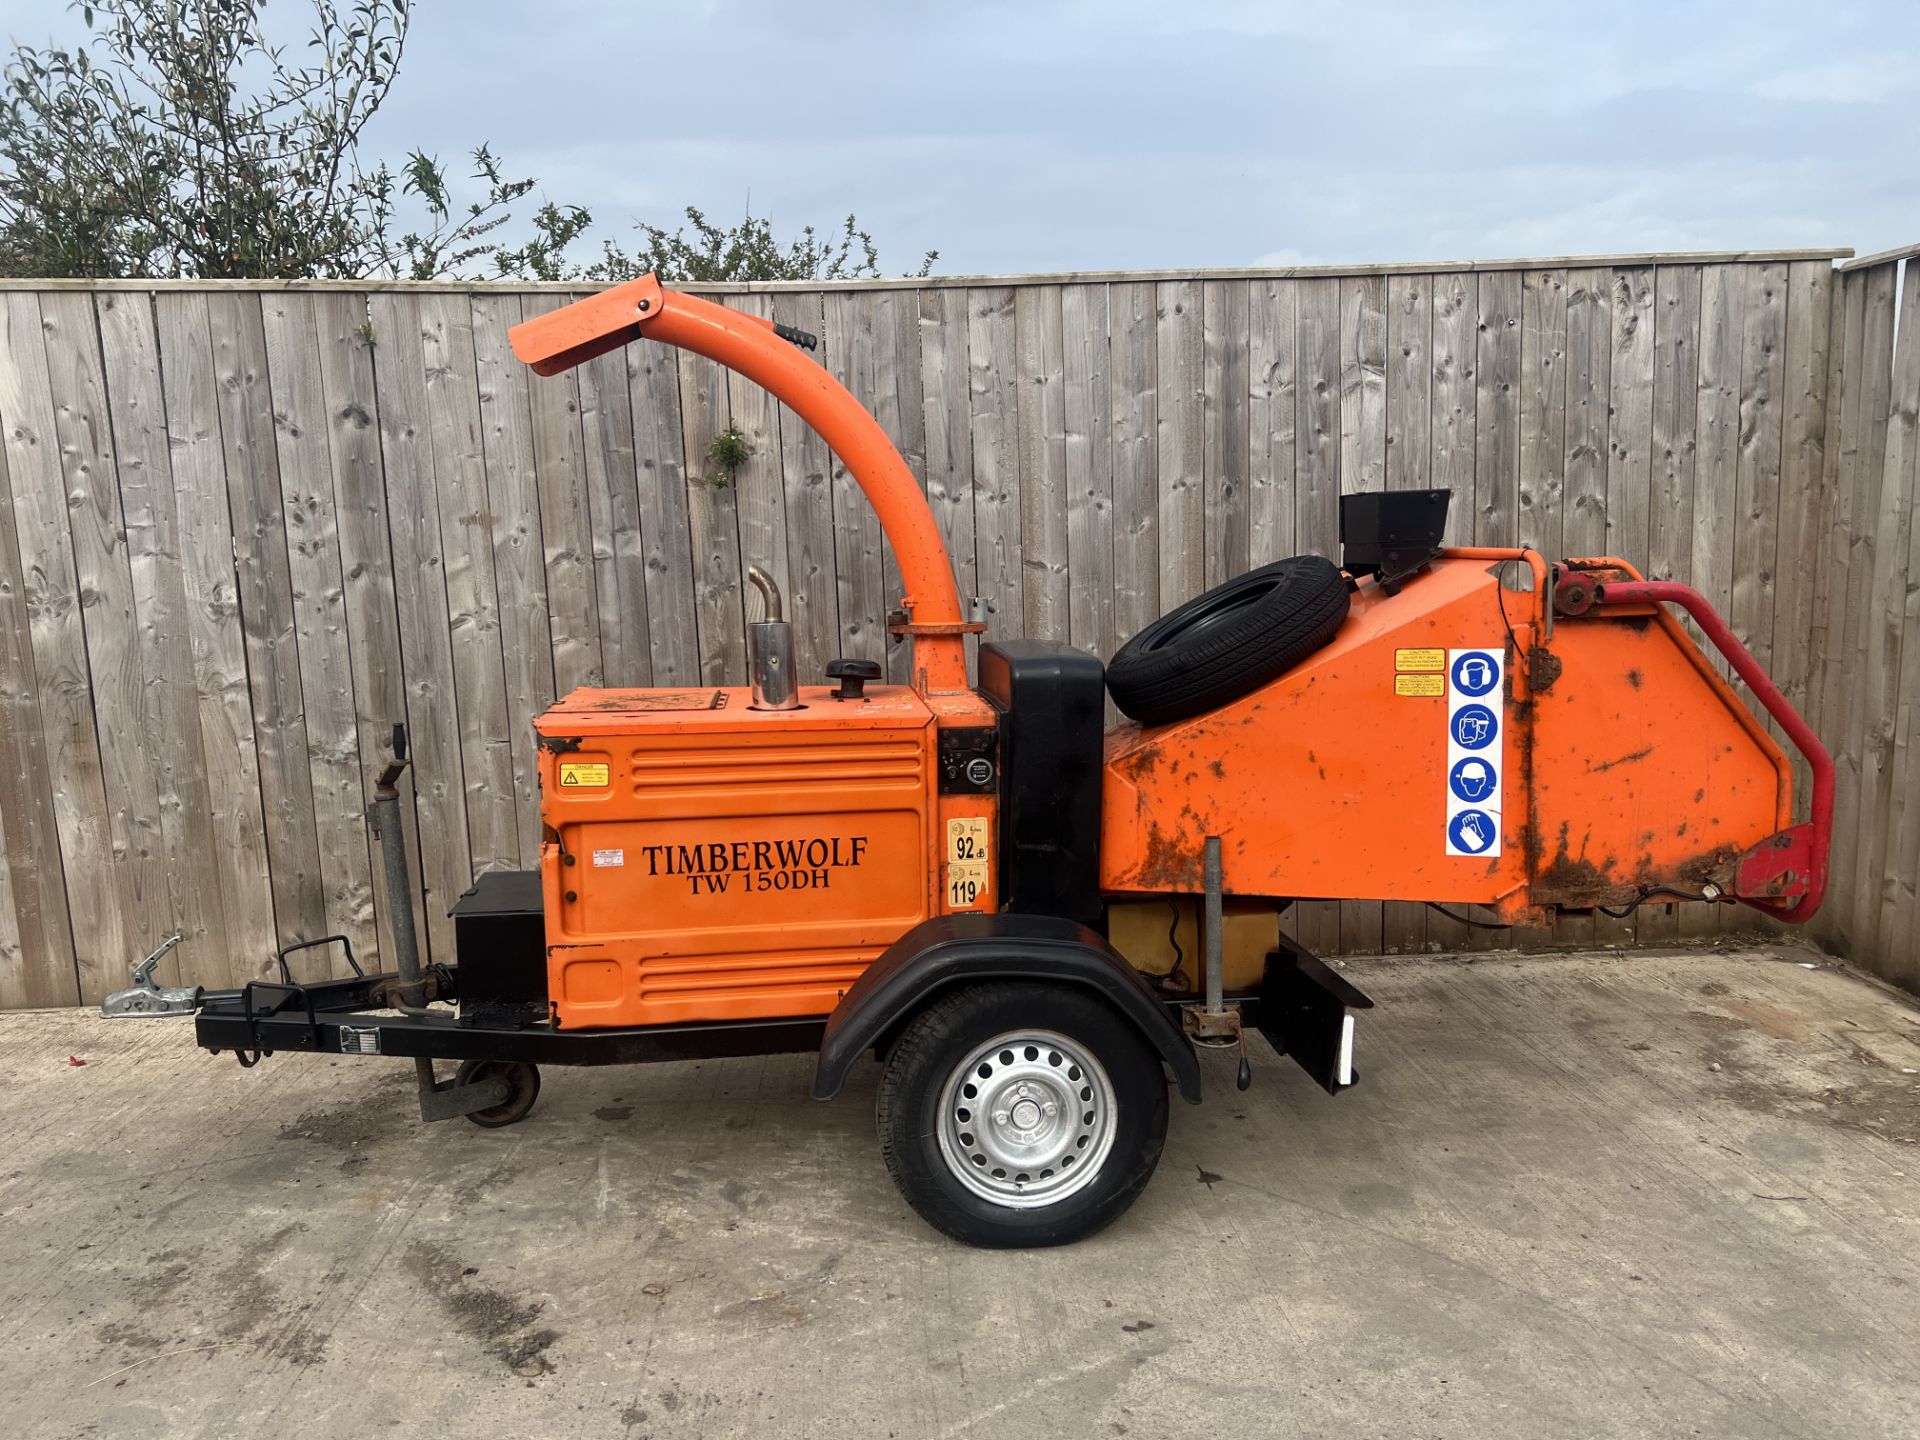 TIMBERWOLF TW150H TOWABLE DIESEL WOOD CHIPPER *LOCATION NORTH YORKSHIRE* - Image 6 of 6